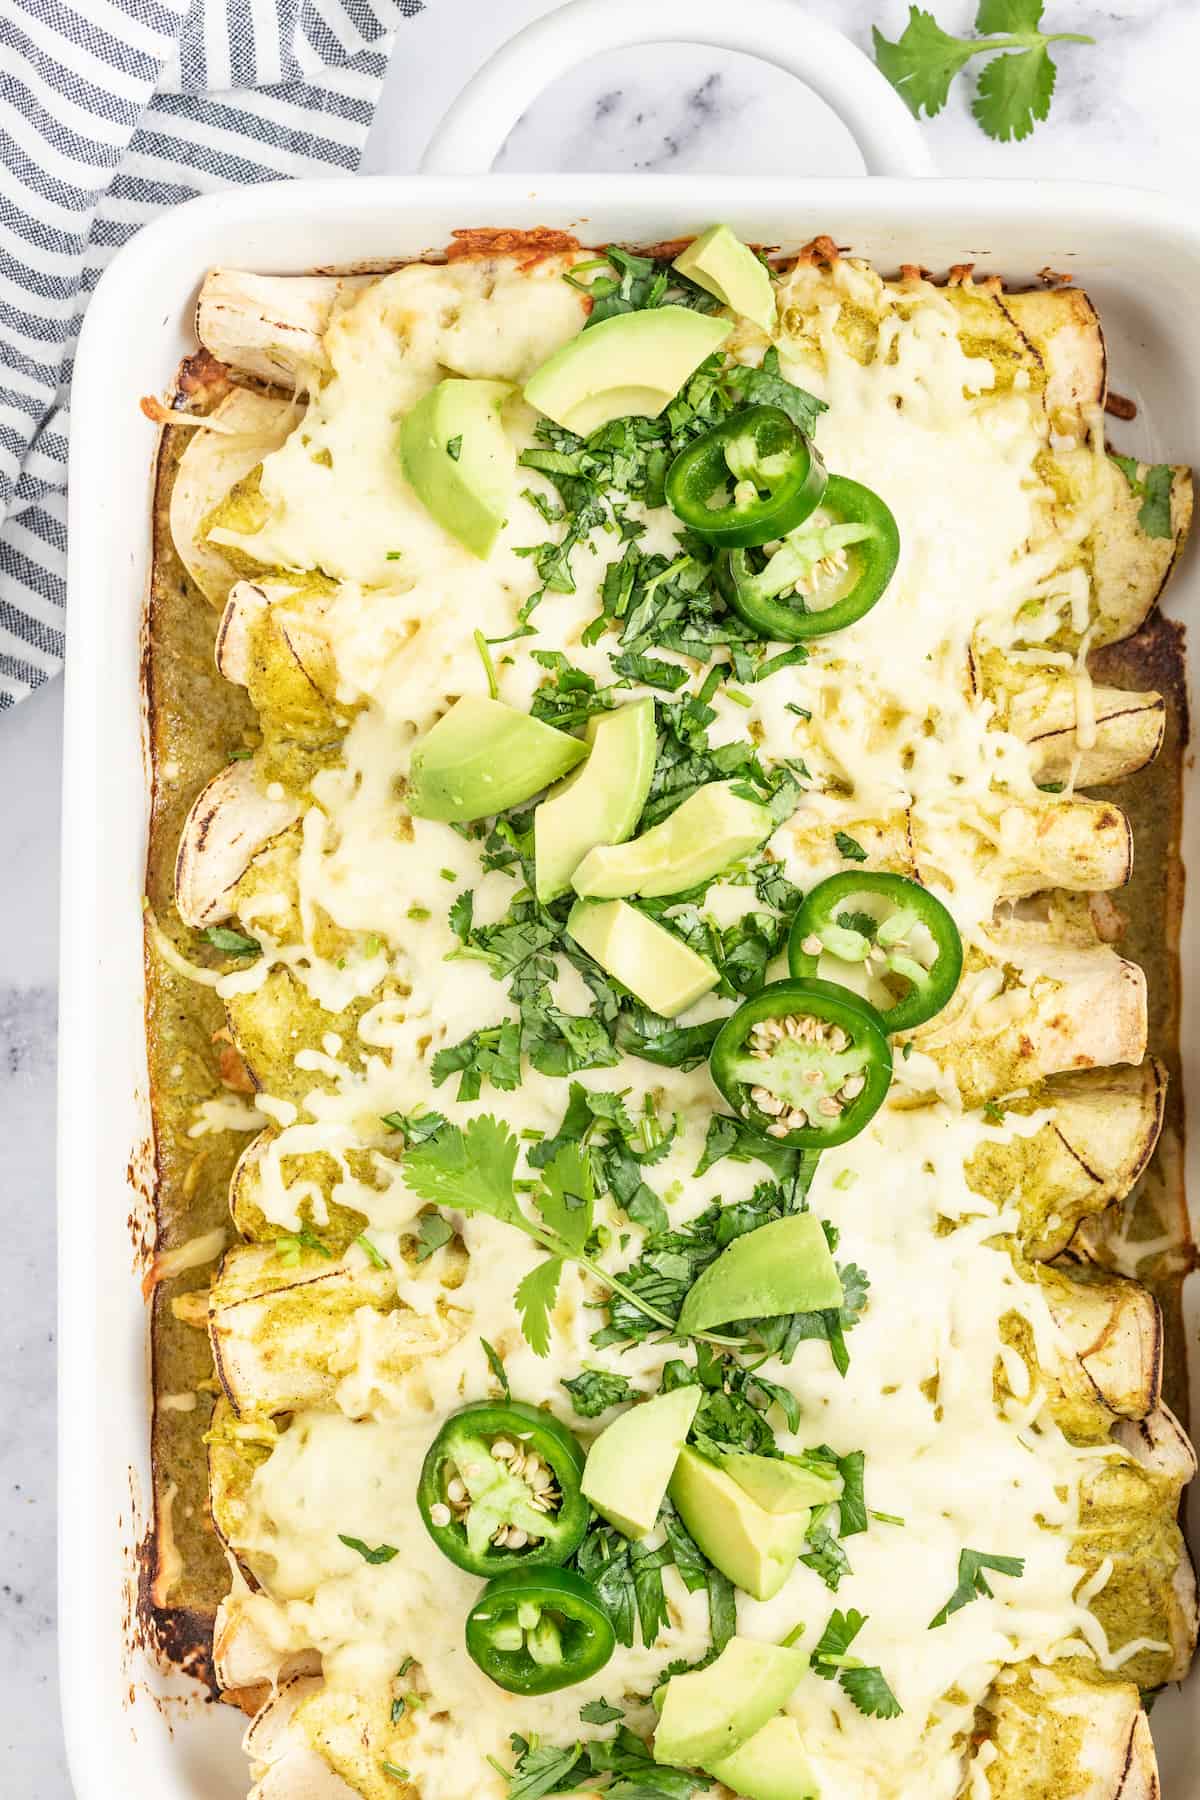 c،erole dish with creamy chicken enchiladas verdes with limes and jalapenos as garnishes